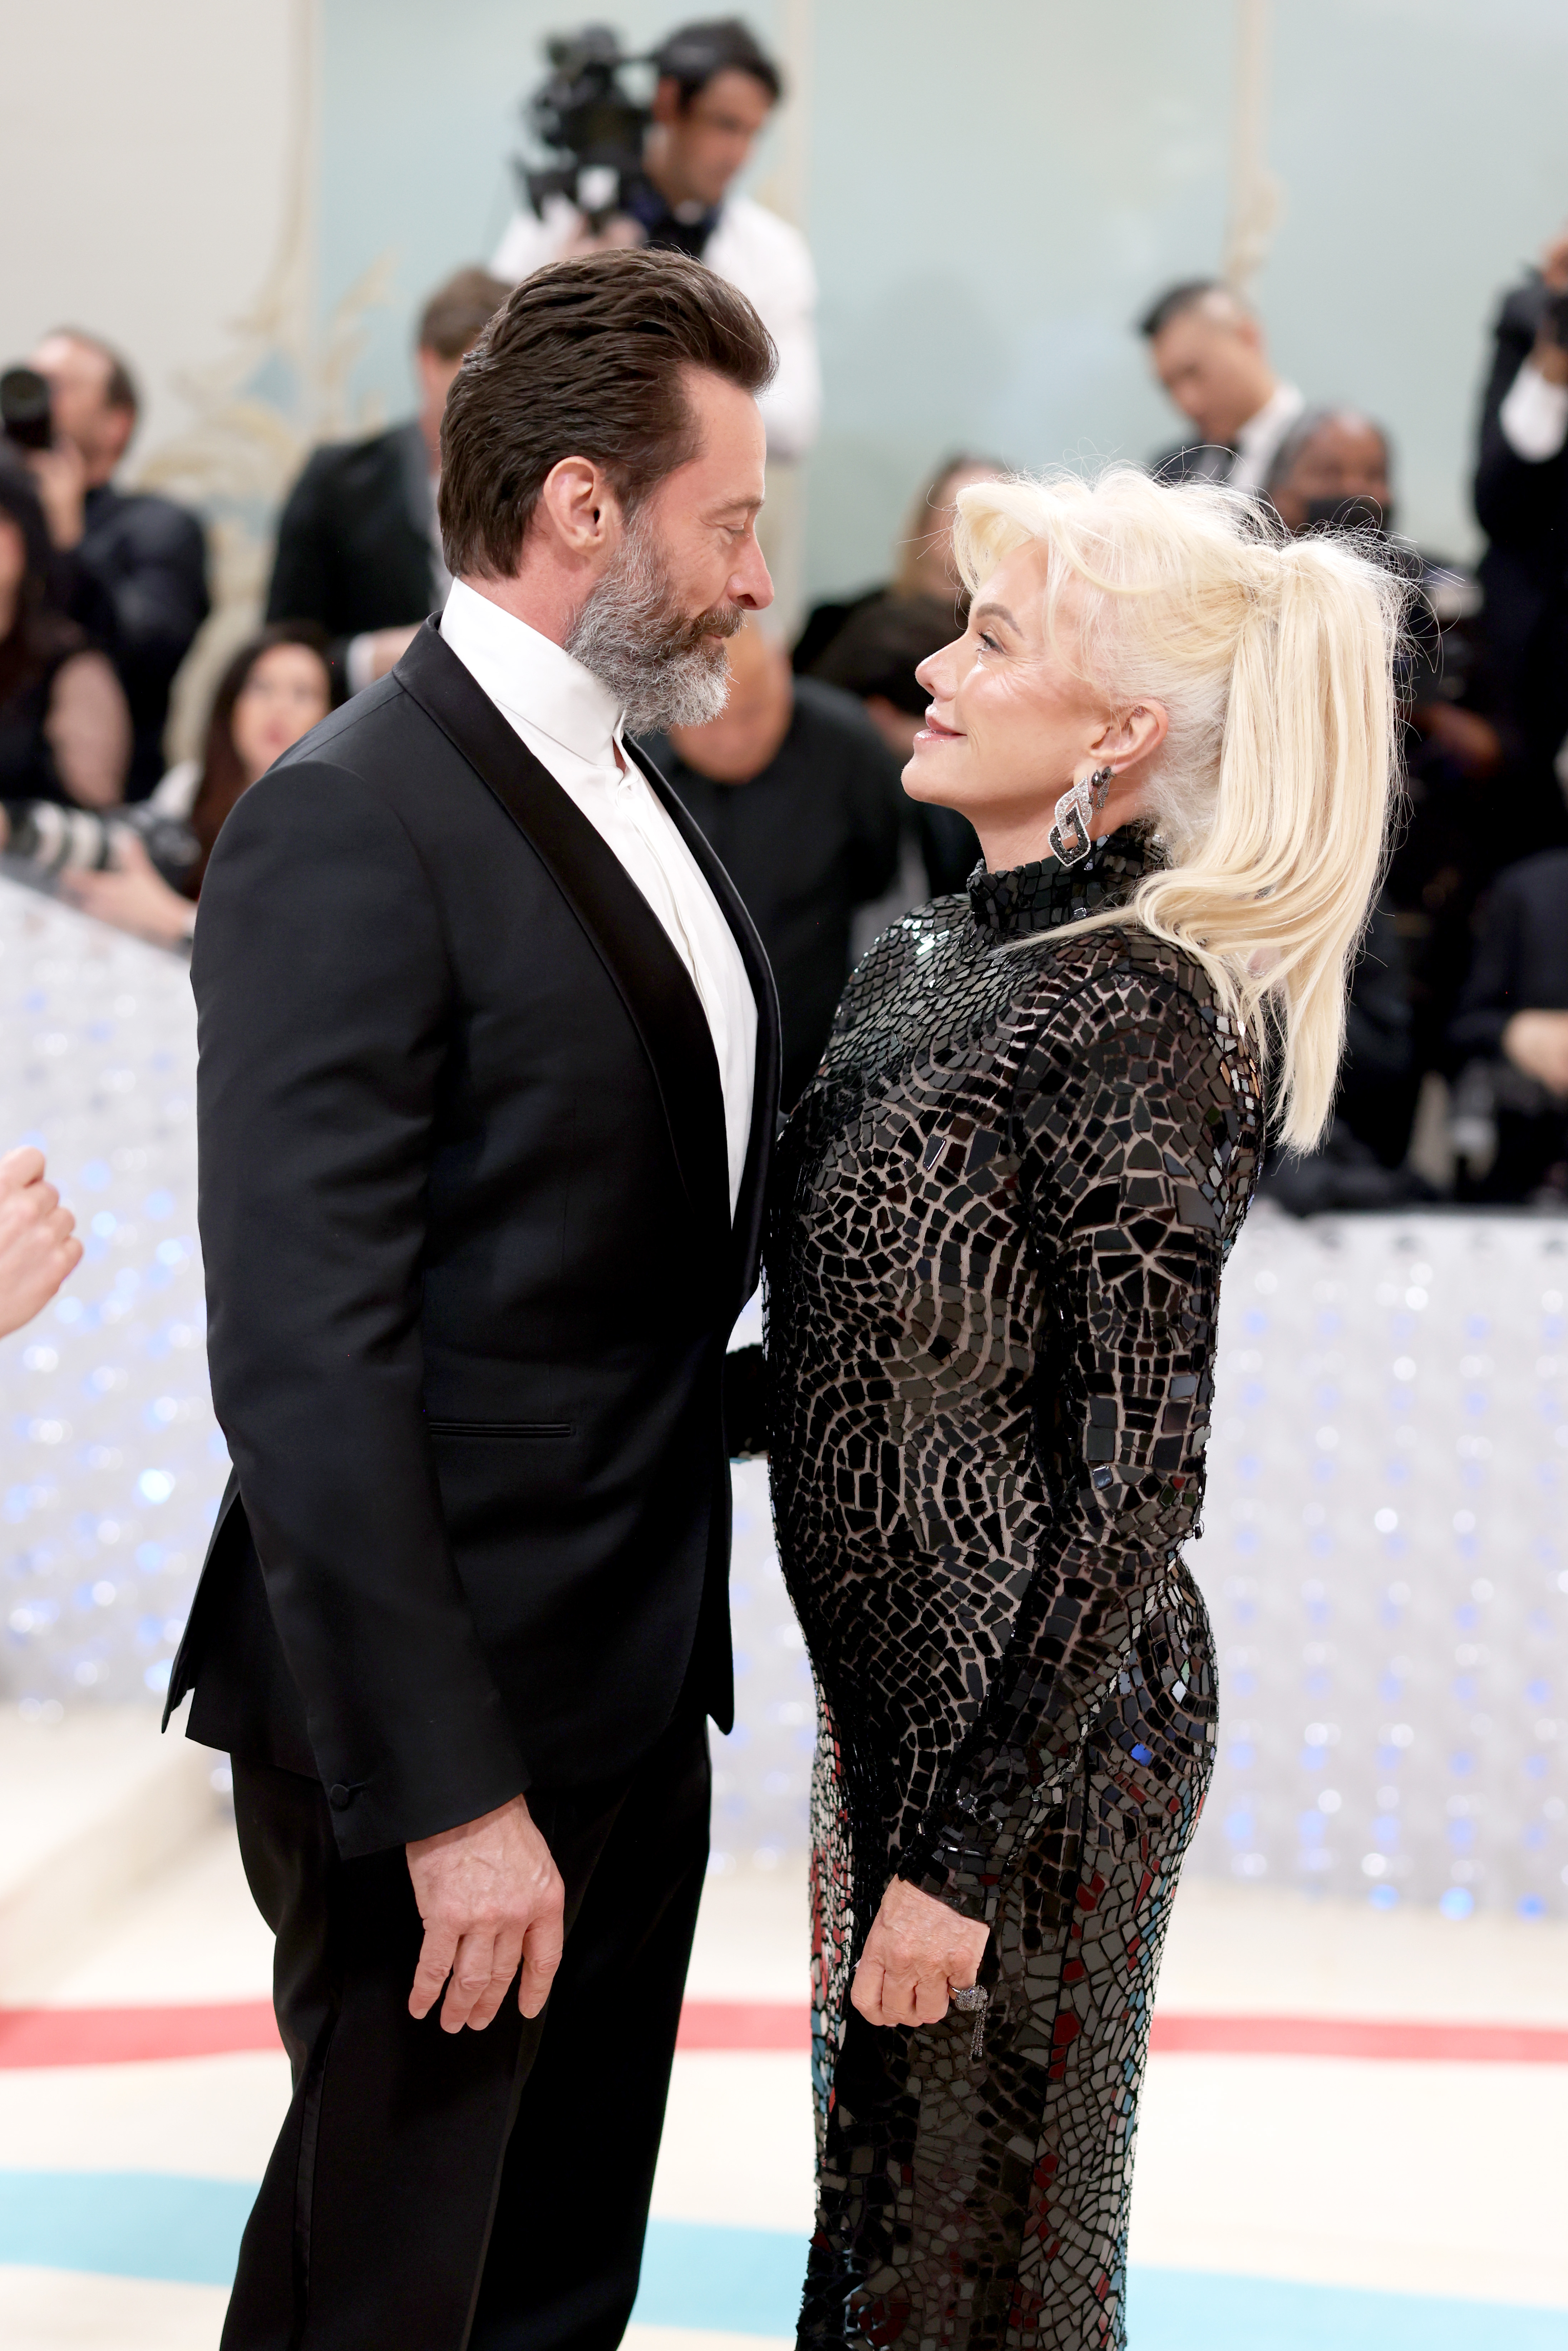 Hugh Jackman and Deborra-Lee Furness at the Met Gala in New York City on May 01, 2023 | Source: Getty Images